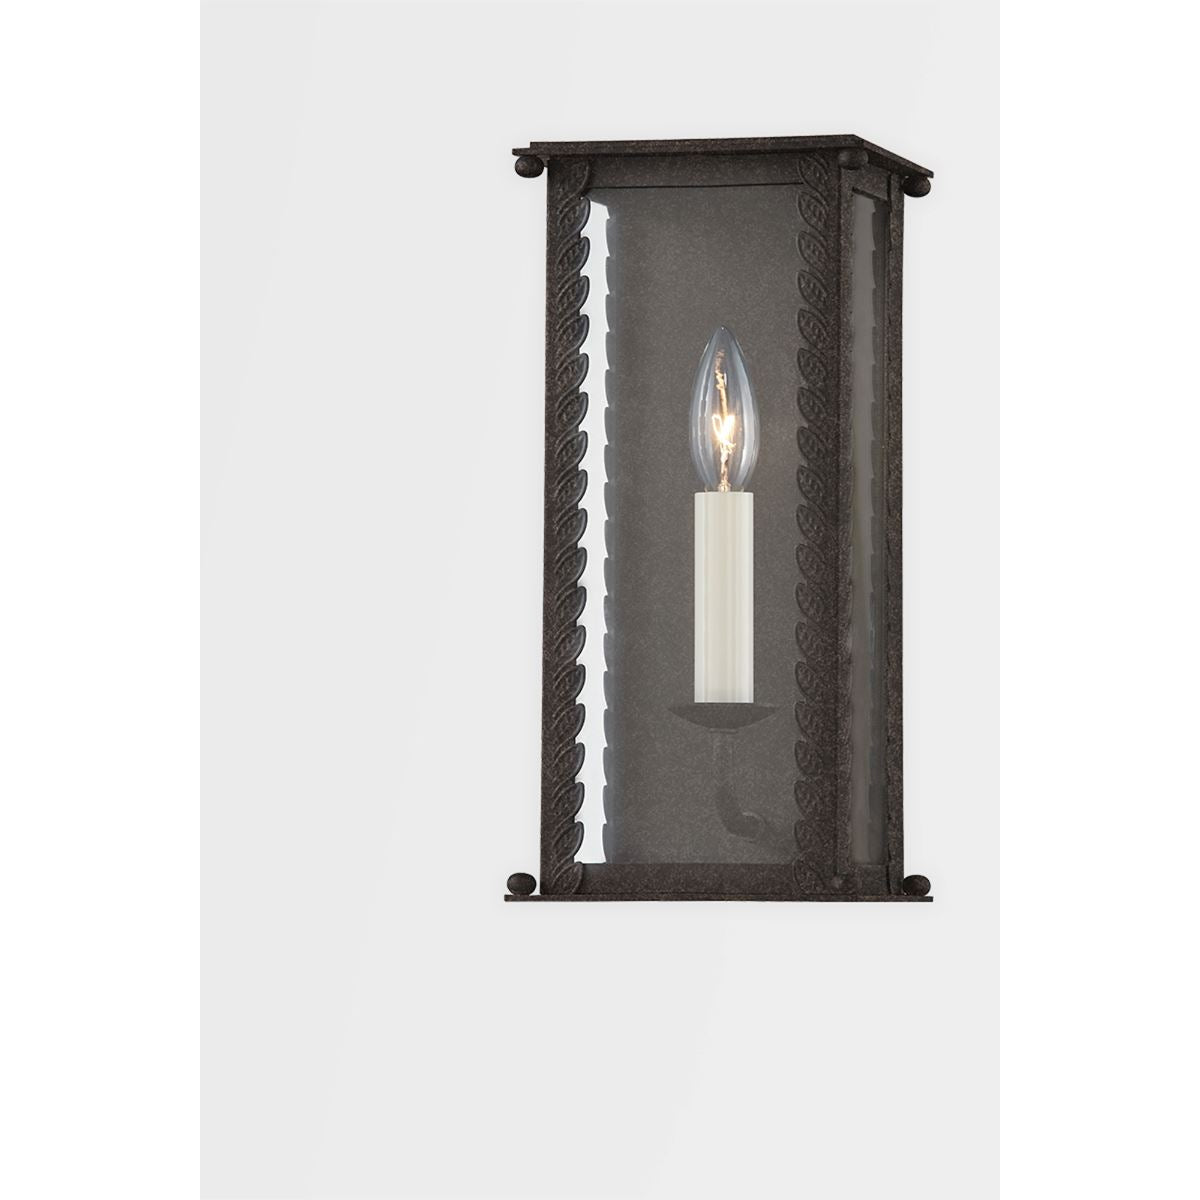 Leslie Wall Sconce - 1 Light. Right angle view.